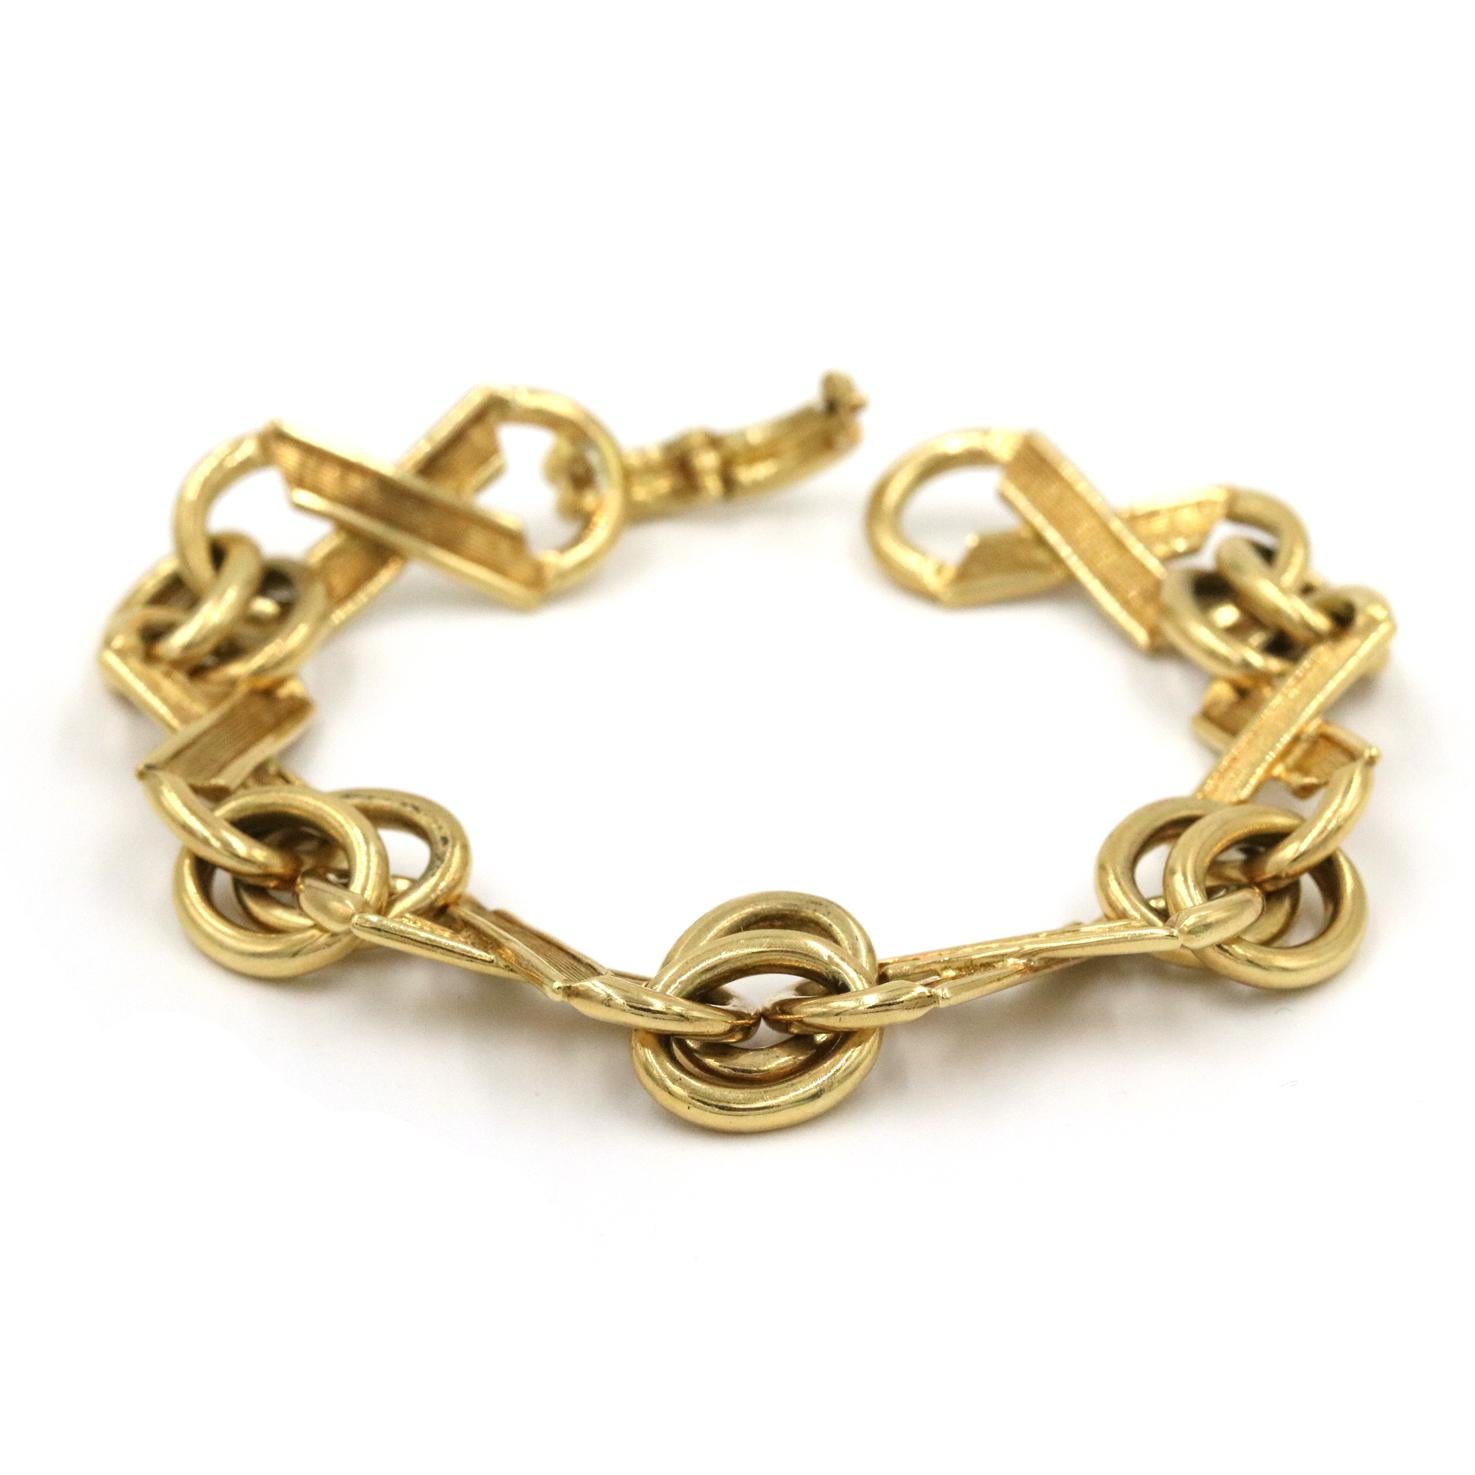 Tiffany Schlumberger Fancy Link Bracelet In 18K Yellow Gold. This Bracelet Has X Shaped Textured Gold Links And Gold Double Ring Links. 